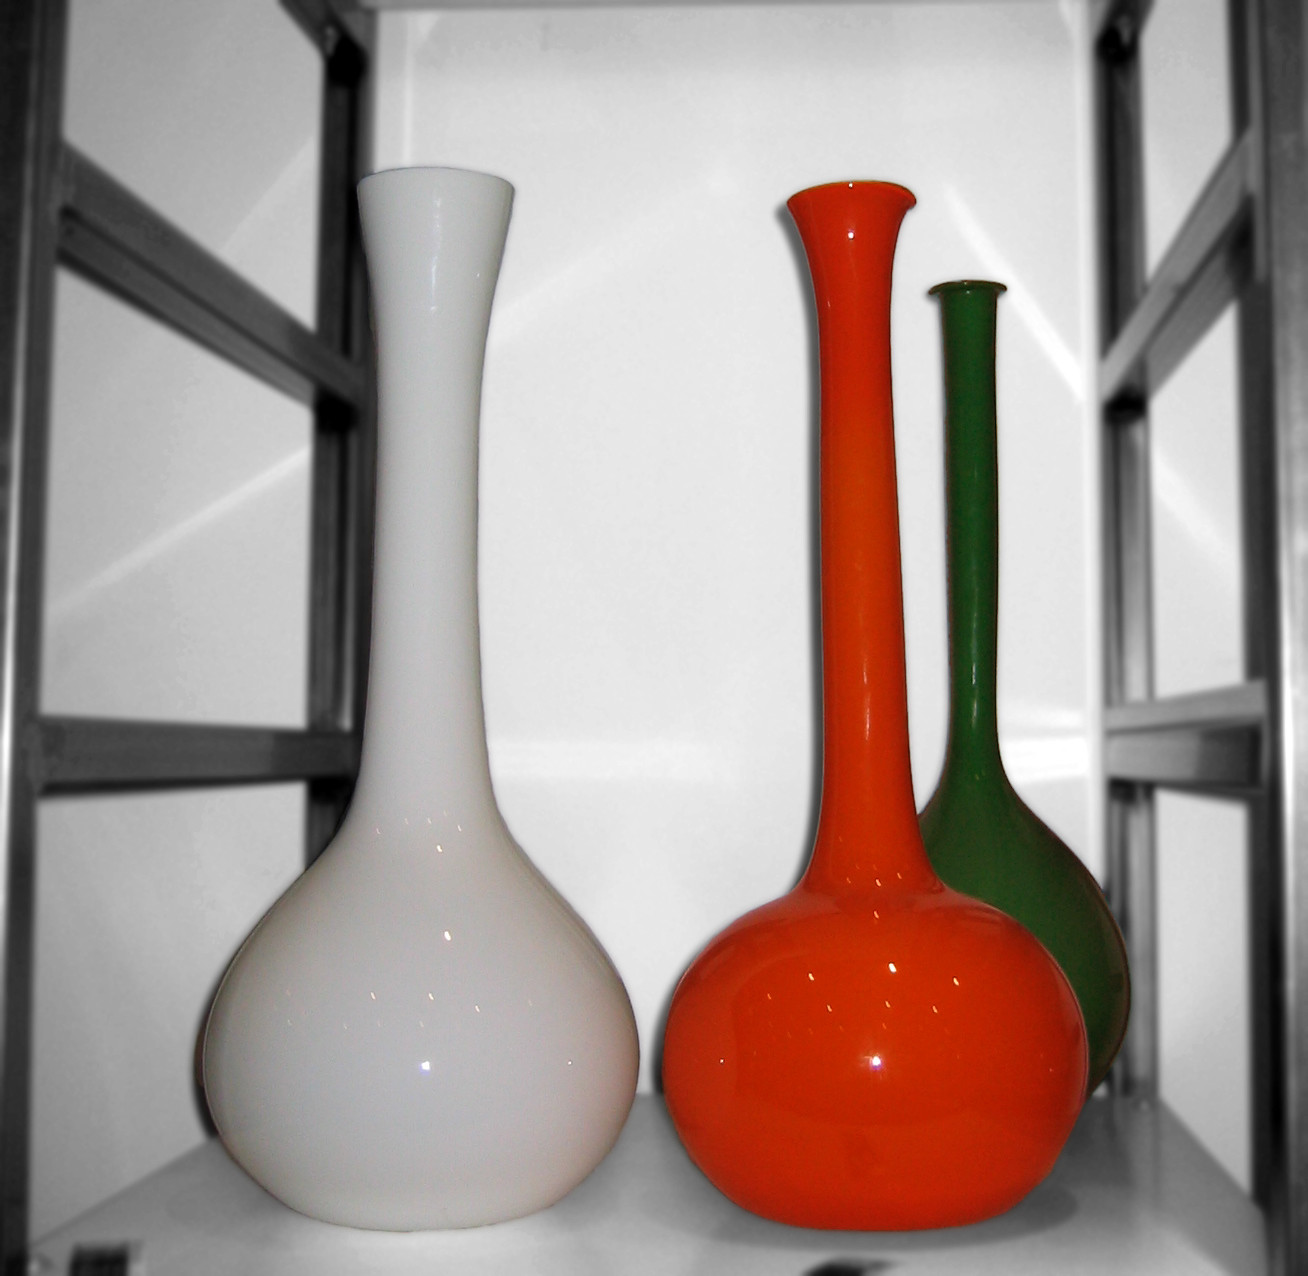 26 Spectacular White Floor Vase Modern 2024 free download white floor vase modern of vases design ideas modern floor and table vases on hayneedle intended for modern floor vases decorative all contemporary design with red white and old green blinki